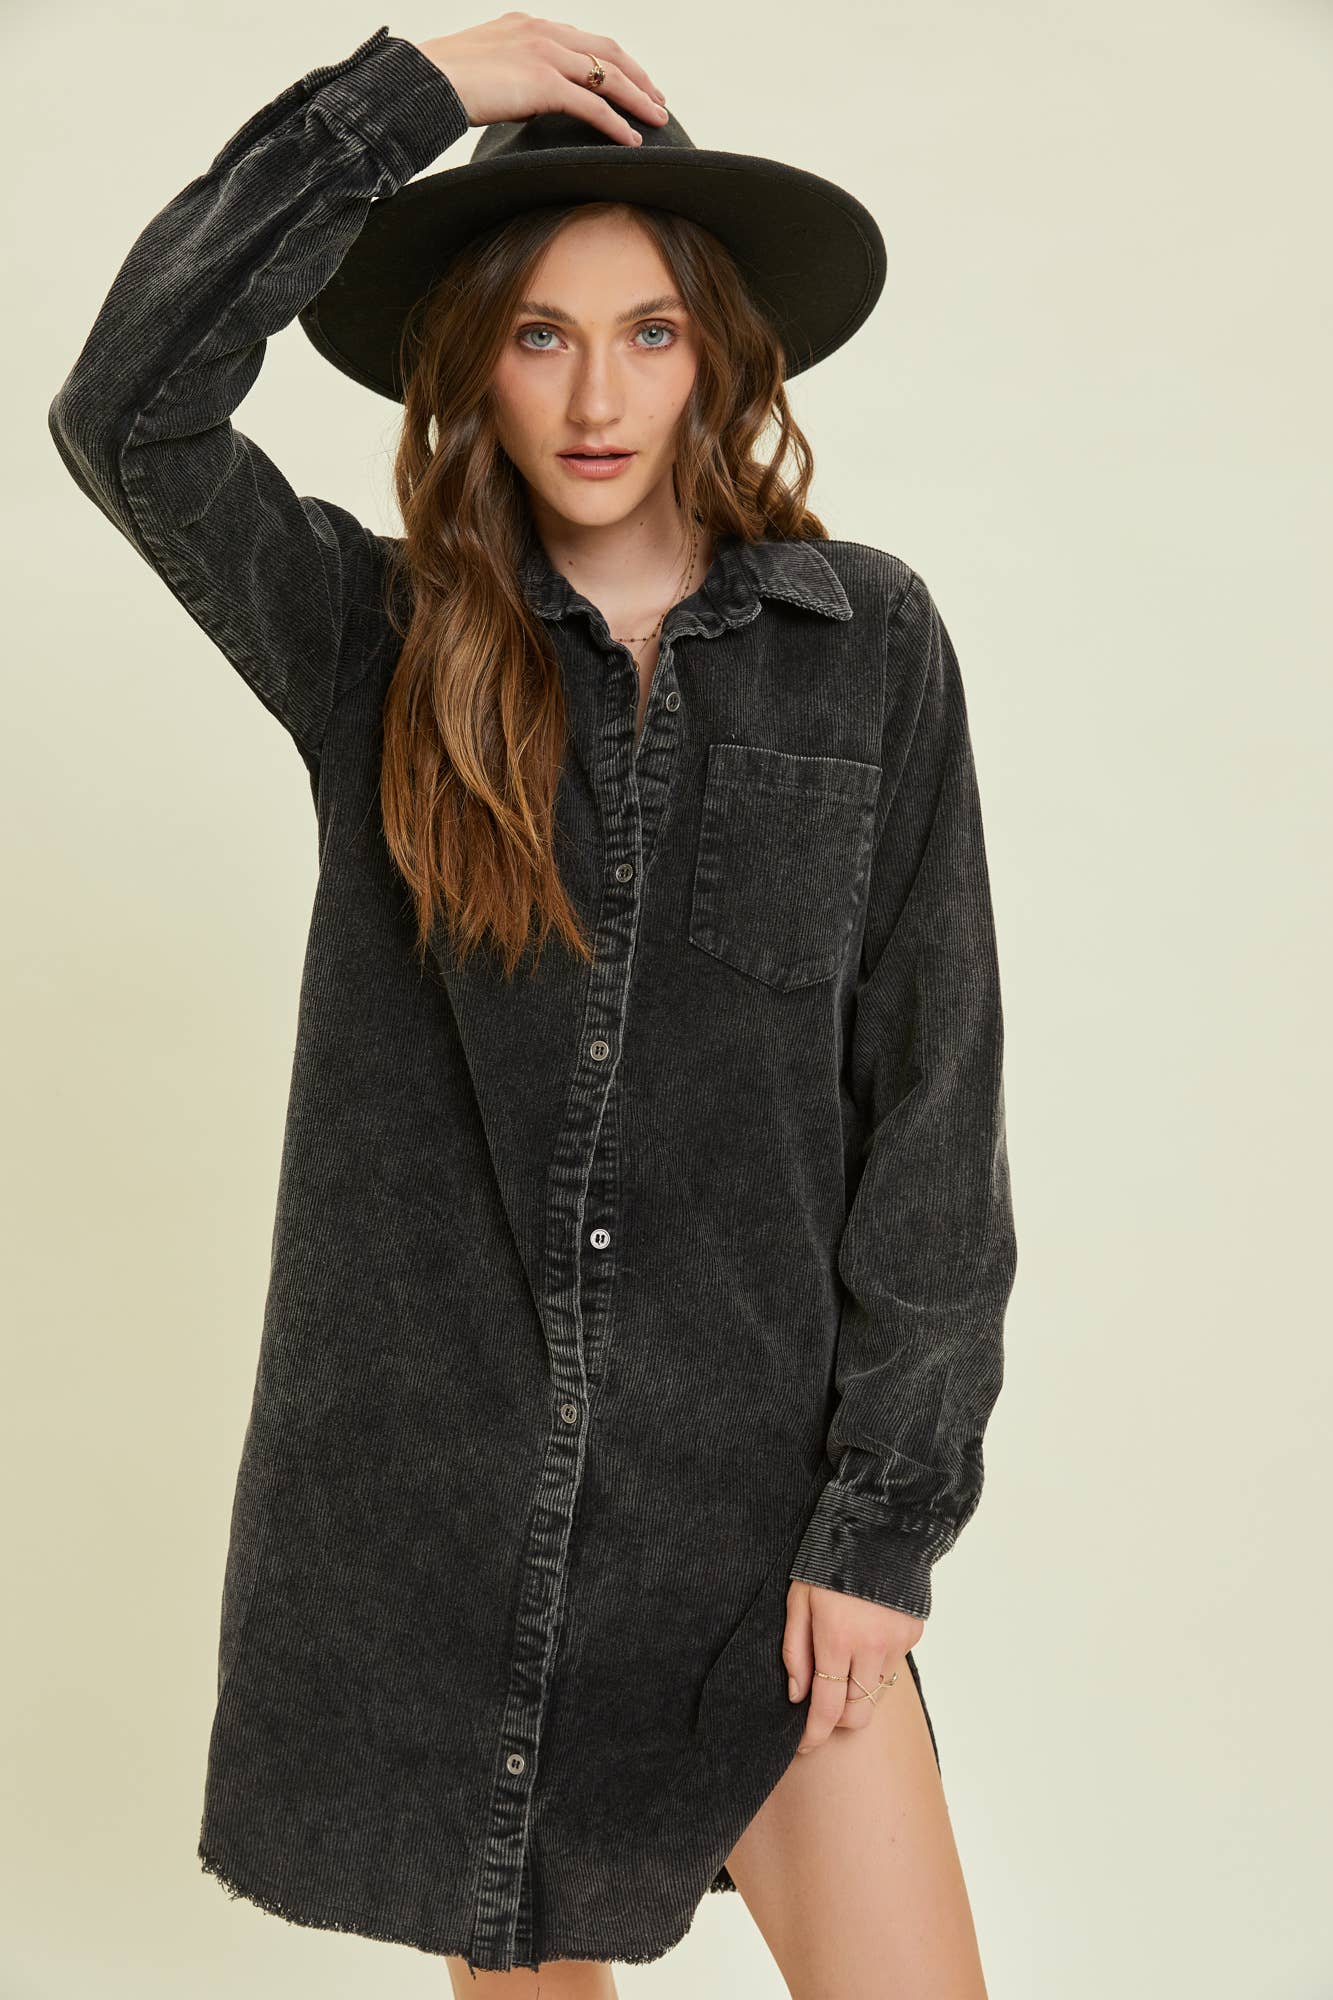 MINERAL WASHED CORDUROY SHIRT DRESS